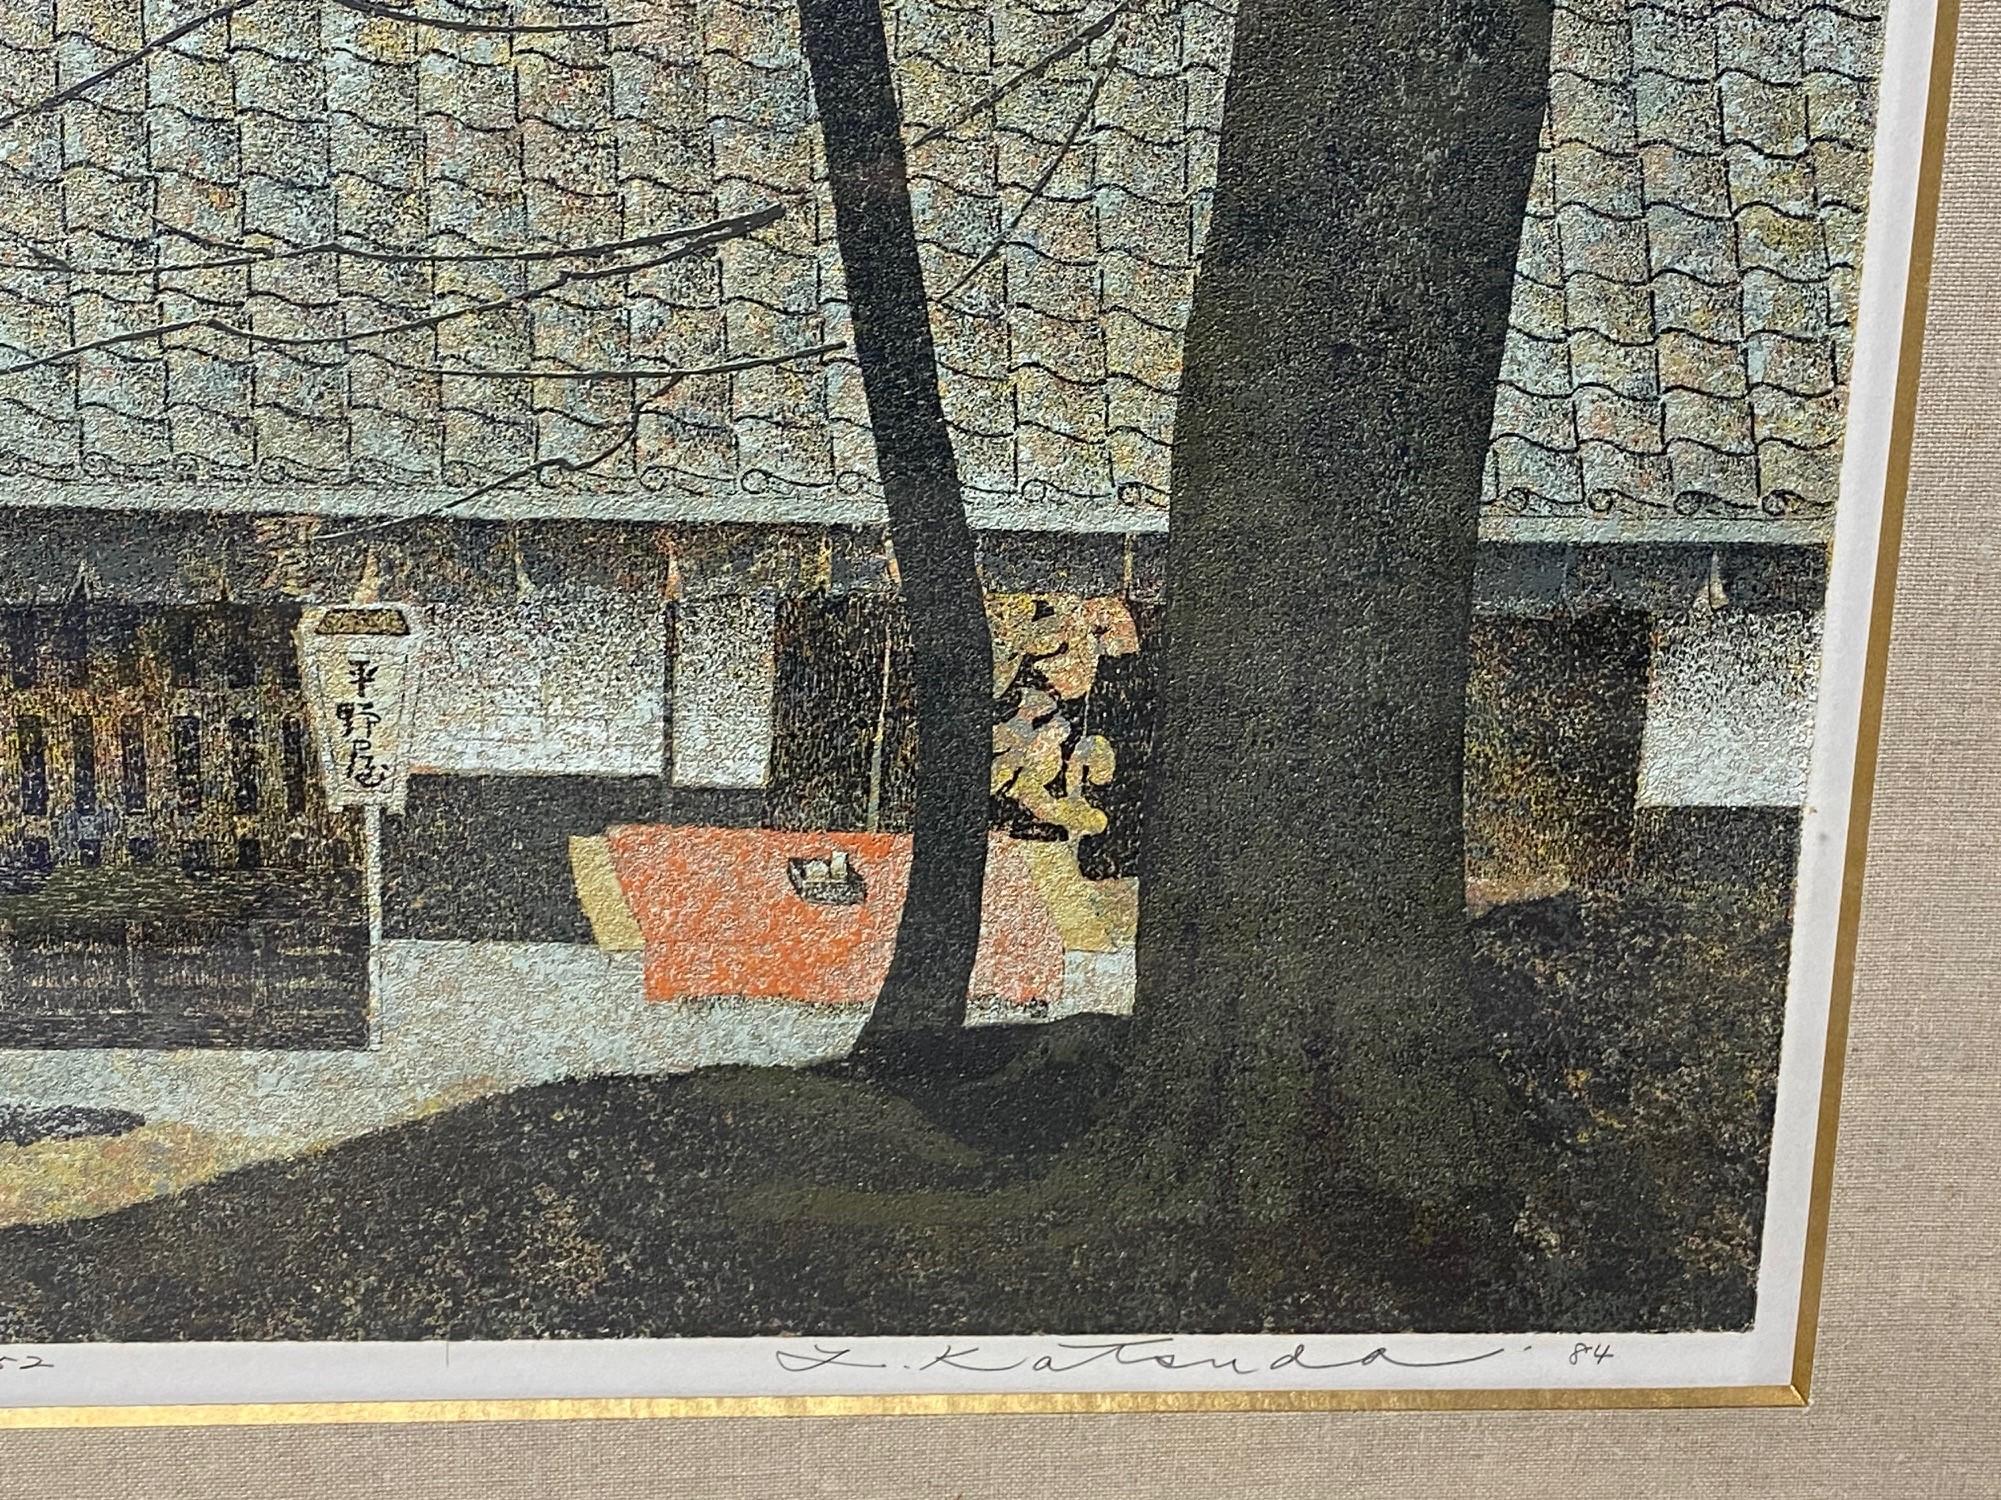 Yukio Katsuda Signed Limited Ed. Japanese Serigraph Print No. 152 Thatched Roof In Good Condition For Sale In Studio City, CA